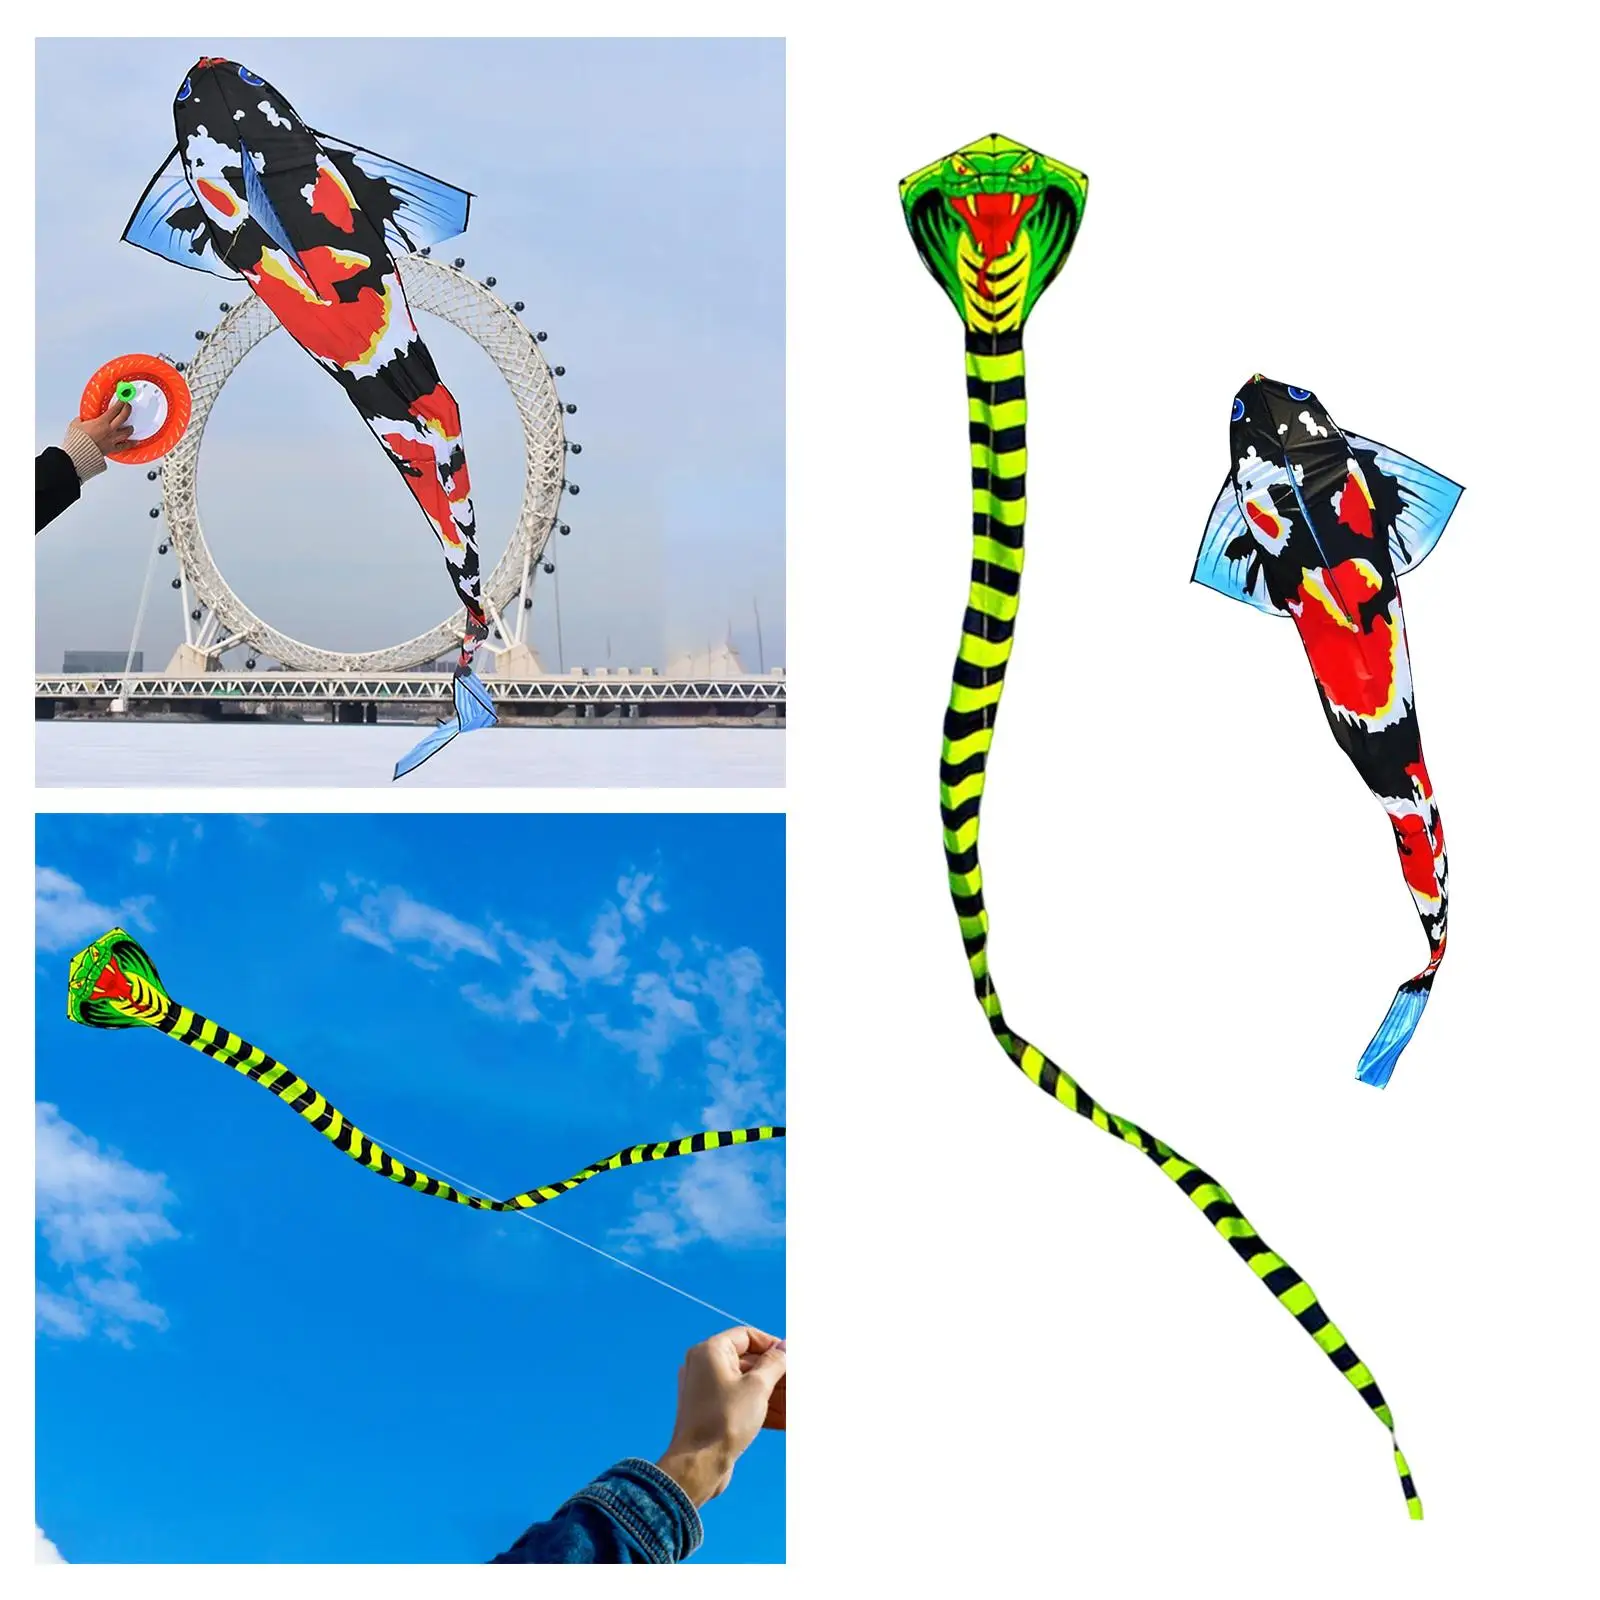 Premium Single Line Kite for Kids and Adults - Effortlessly Soar with a Colorful Long Tail